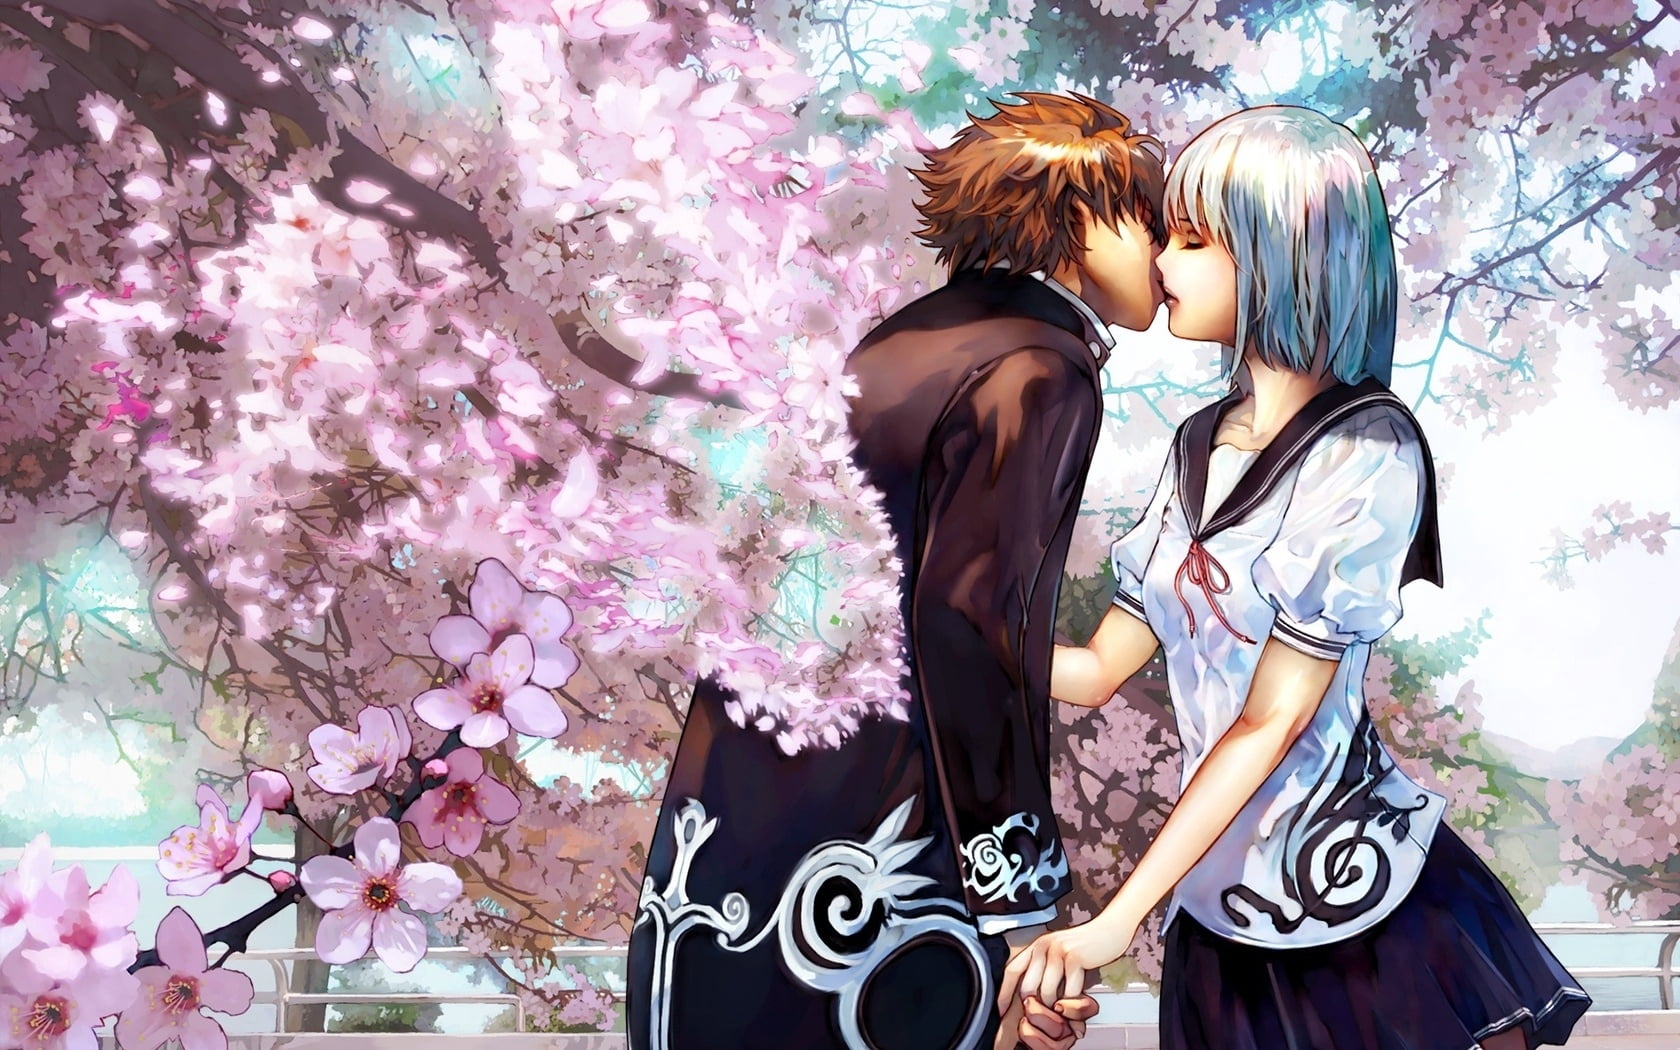 man and woman kissing under cherry blossom tree animated wallpaper